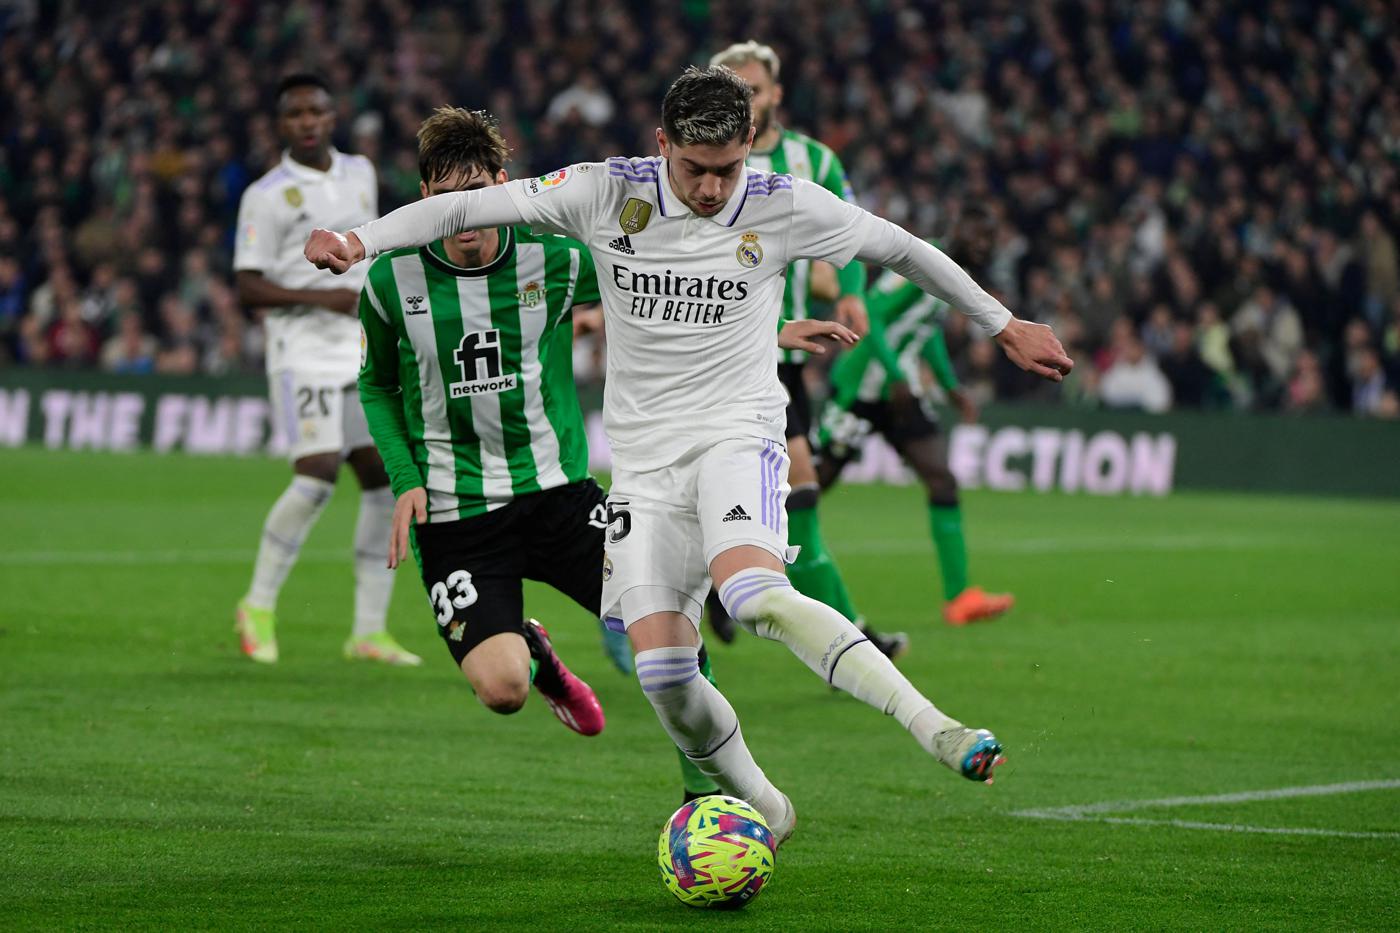 Betis - Real - 0:0. Spain Championship, round 24. Match review, statistics